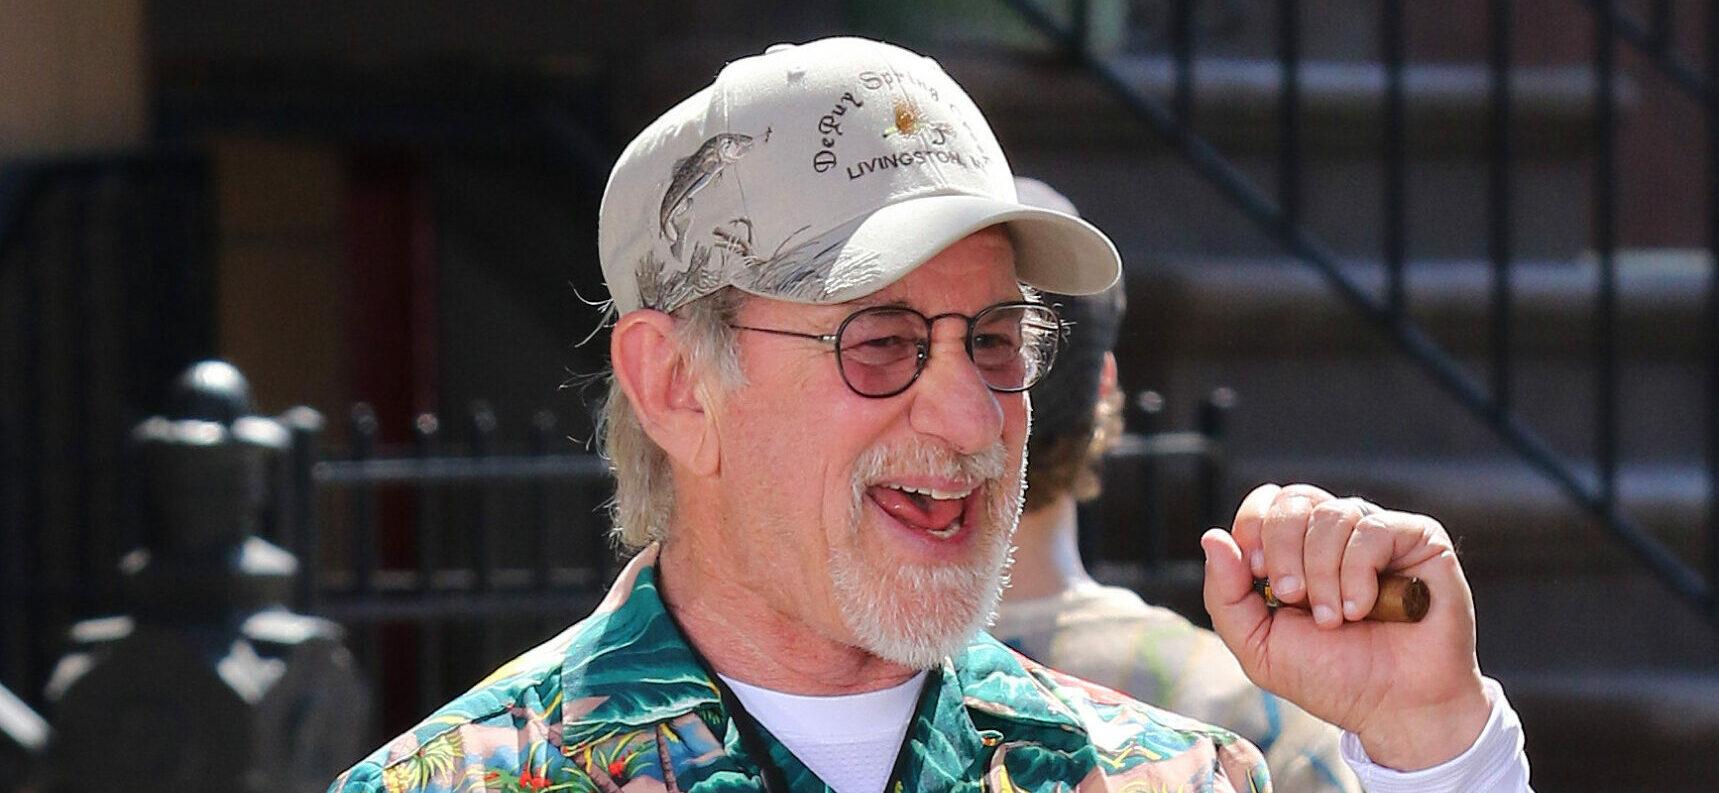 Steven Spielberg is all smiles and hard at work on the upcoming movie remake of the classic musical "West Side Story" filming in Manhattan's Harlem neighborhood. Spielberg is pictured directing the gang "The Jets" with actor Mike Faist who will play 'Riff' who is the leader of the Jets. The gang was seen doing a dance routine while filming a scene. 13 Jul 2019 Pictured: Steven Spielberg. Photo credit: LRNYC / MEGA TheMegaAgency.com +1 888 505 6342 (Mega Agency TagID: MEGA465490_001.jpg) [Photo via Mega Agency]